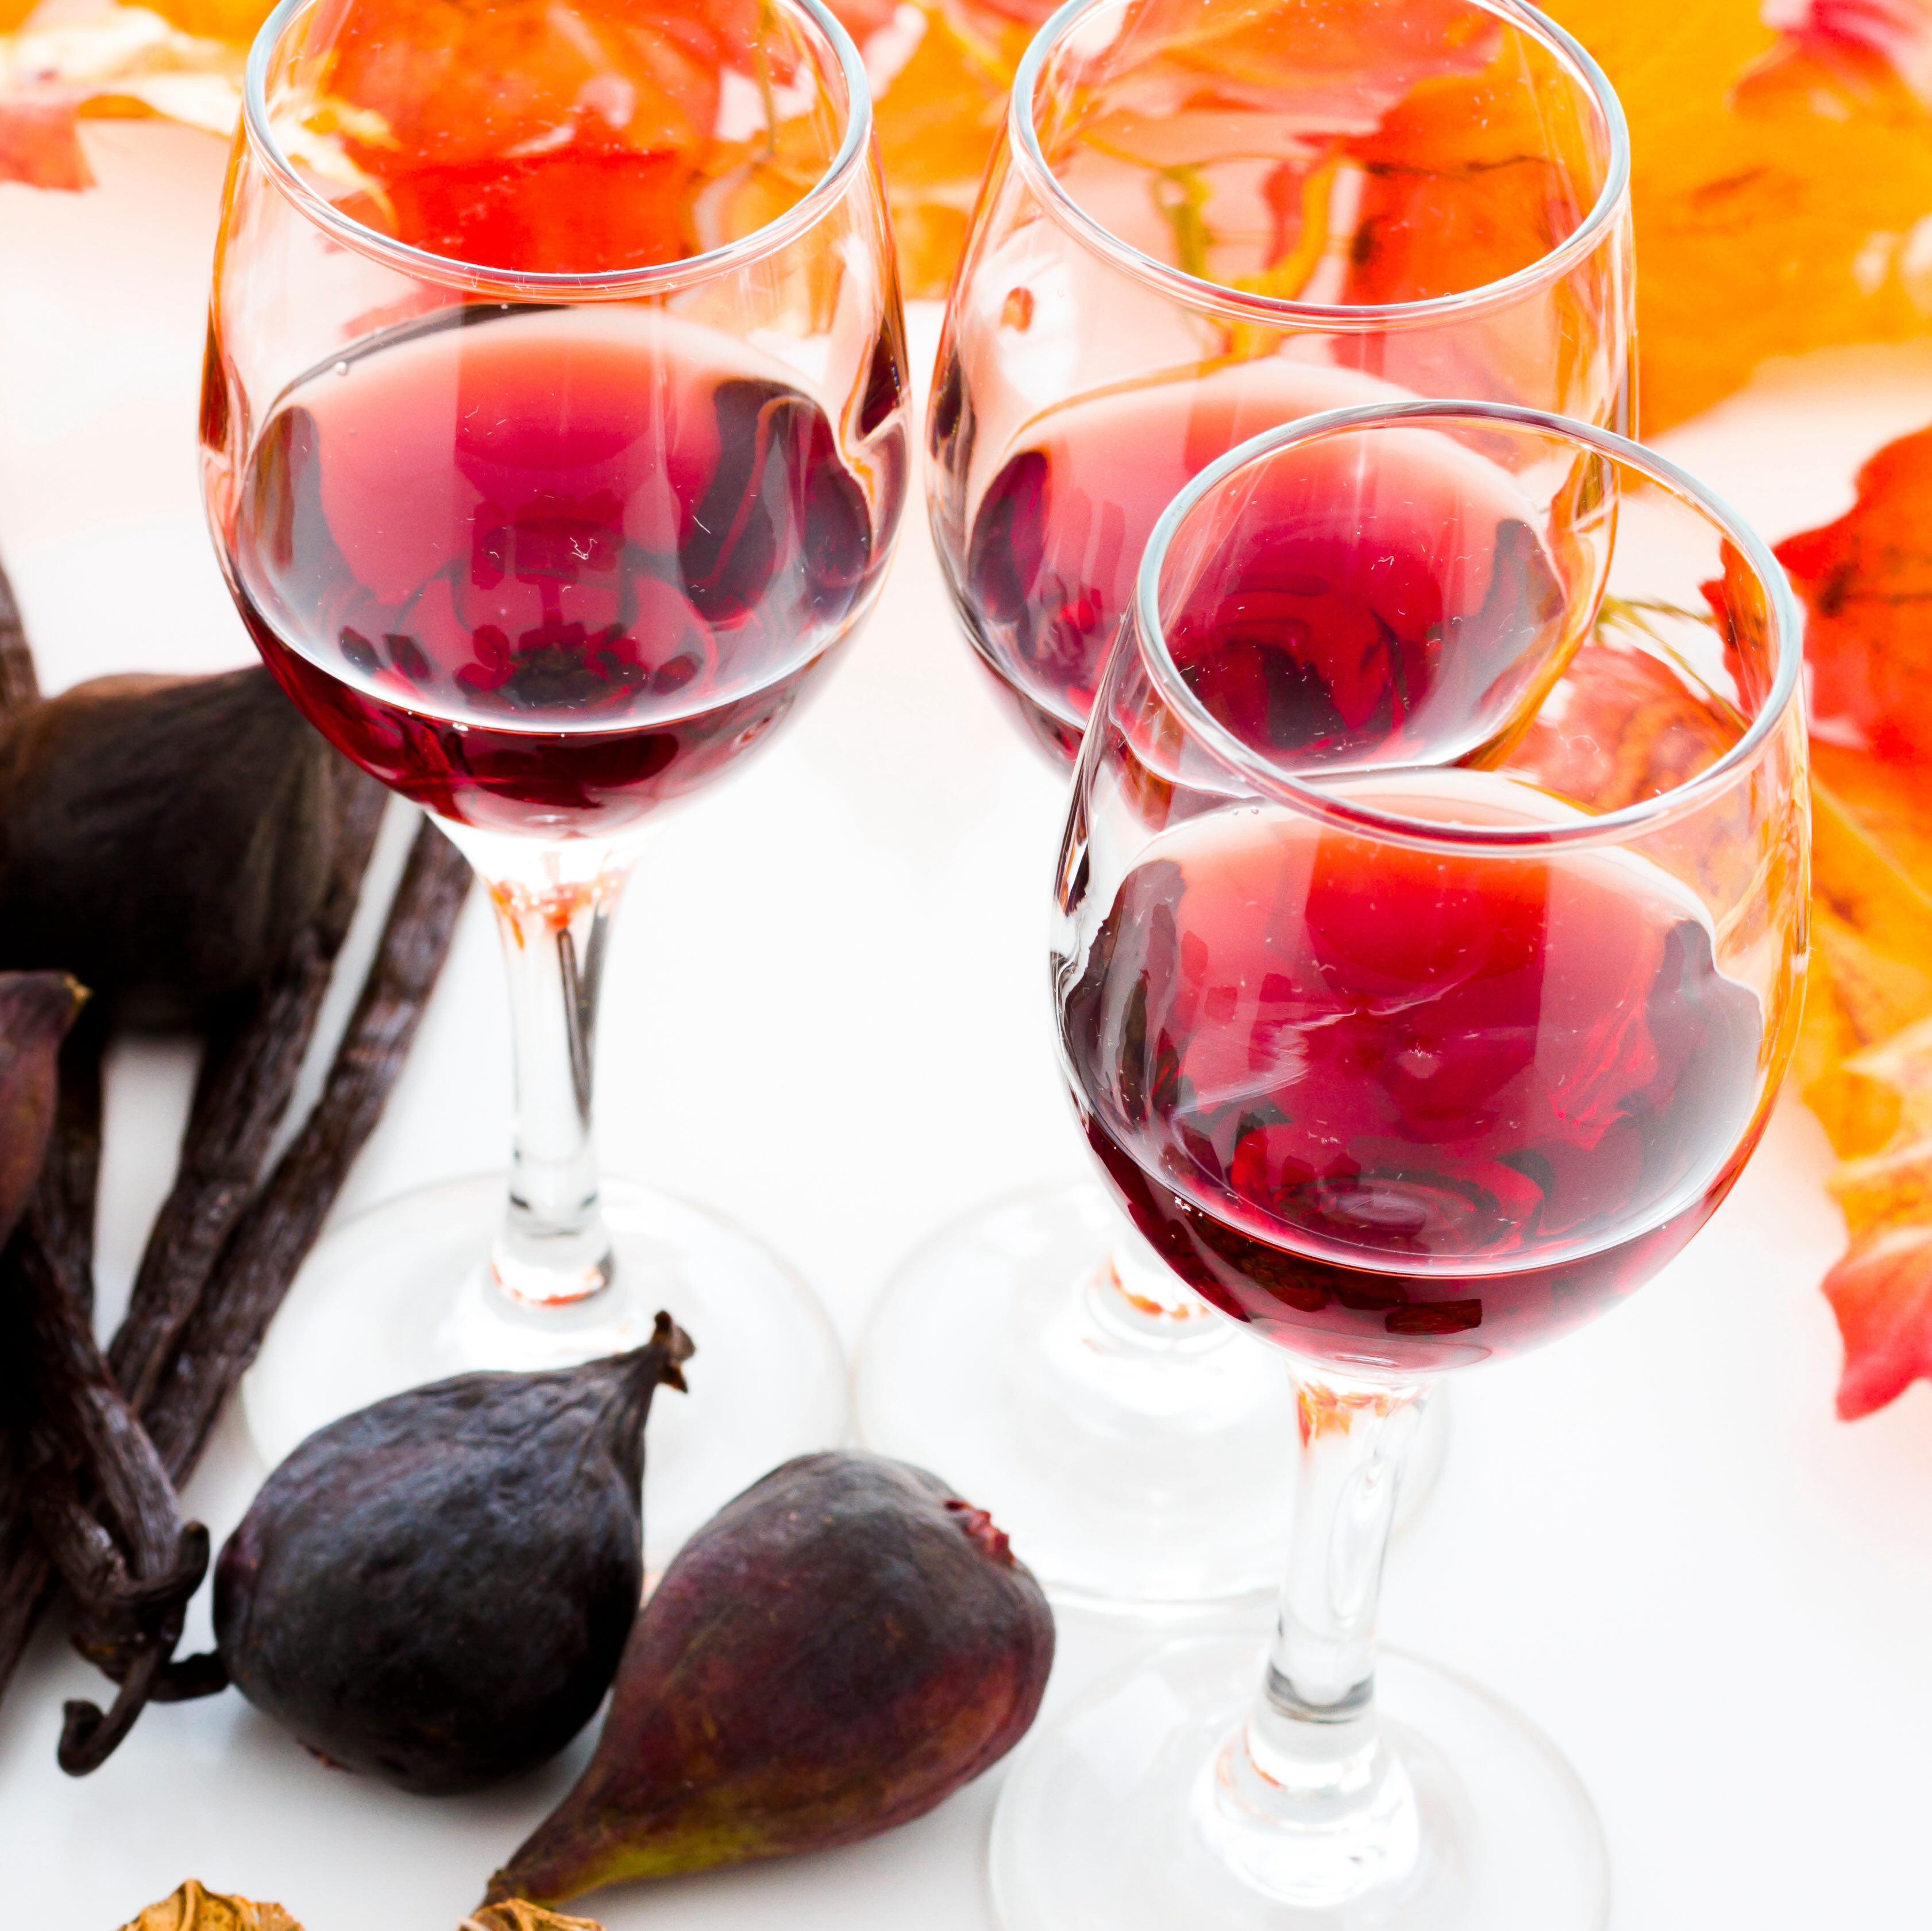 Port and Dessert Wine Traditions